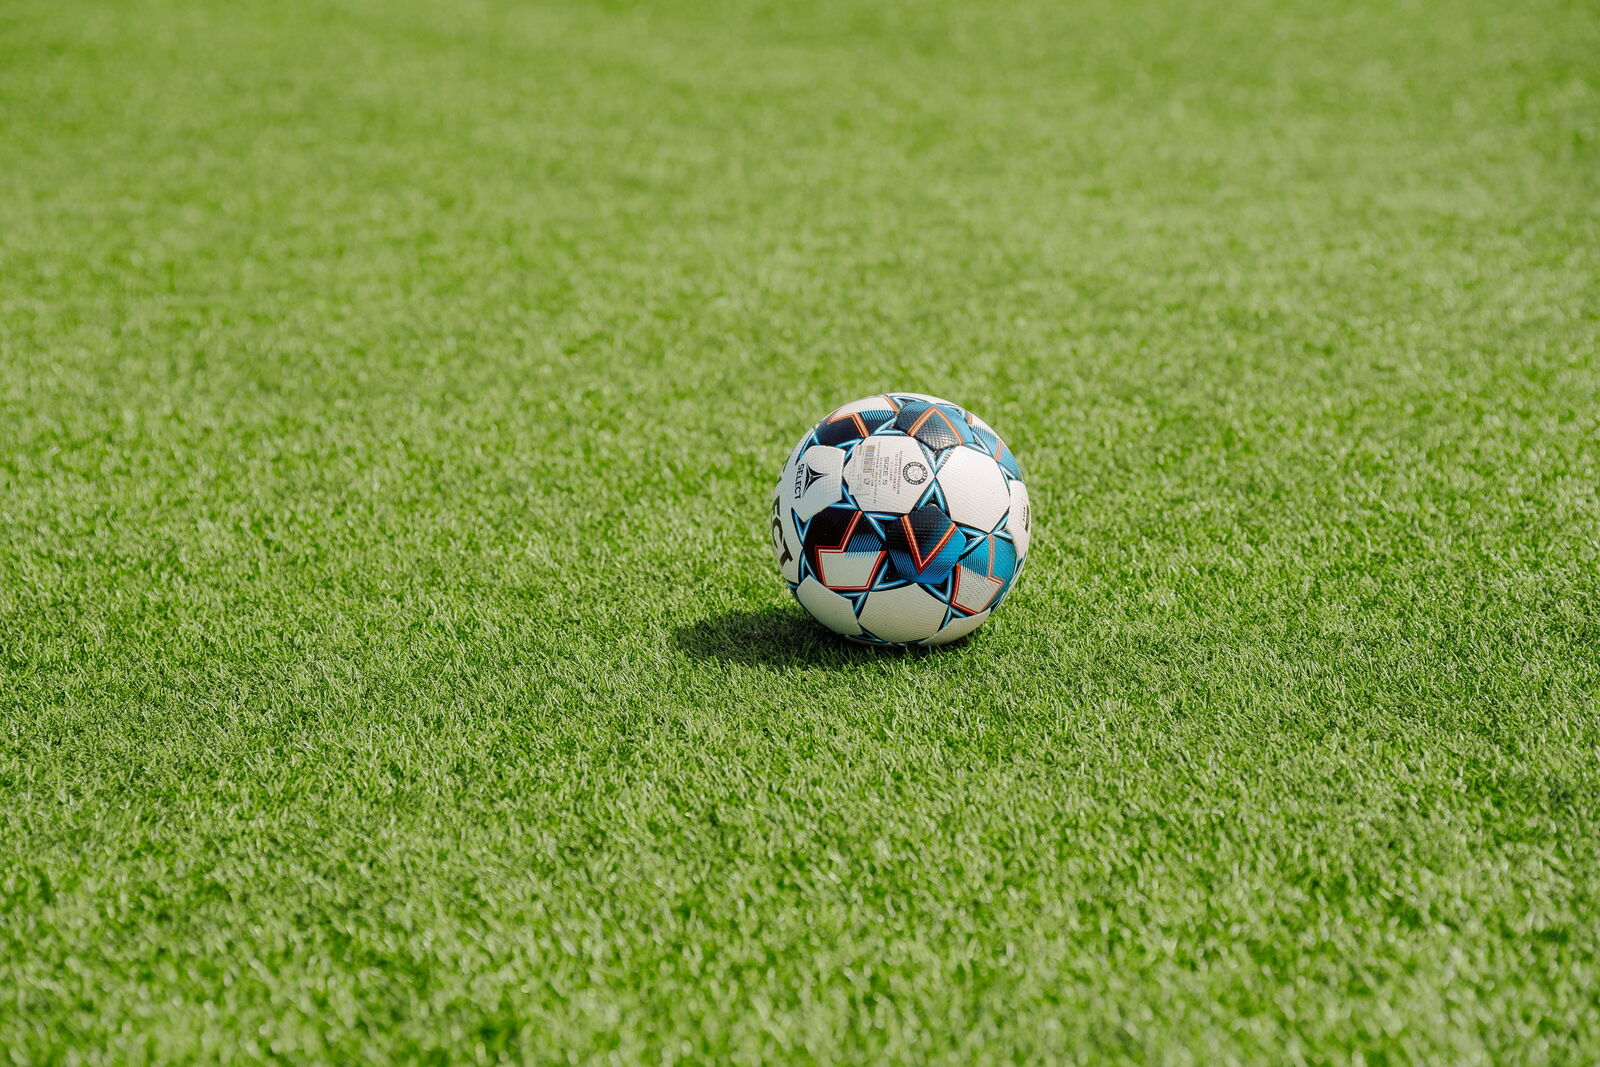 Ball on green turf field - Act Sports, the Premium Artificial Sports Turf Supplier